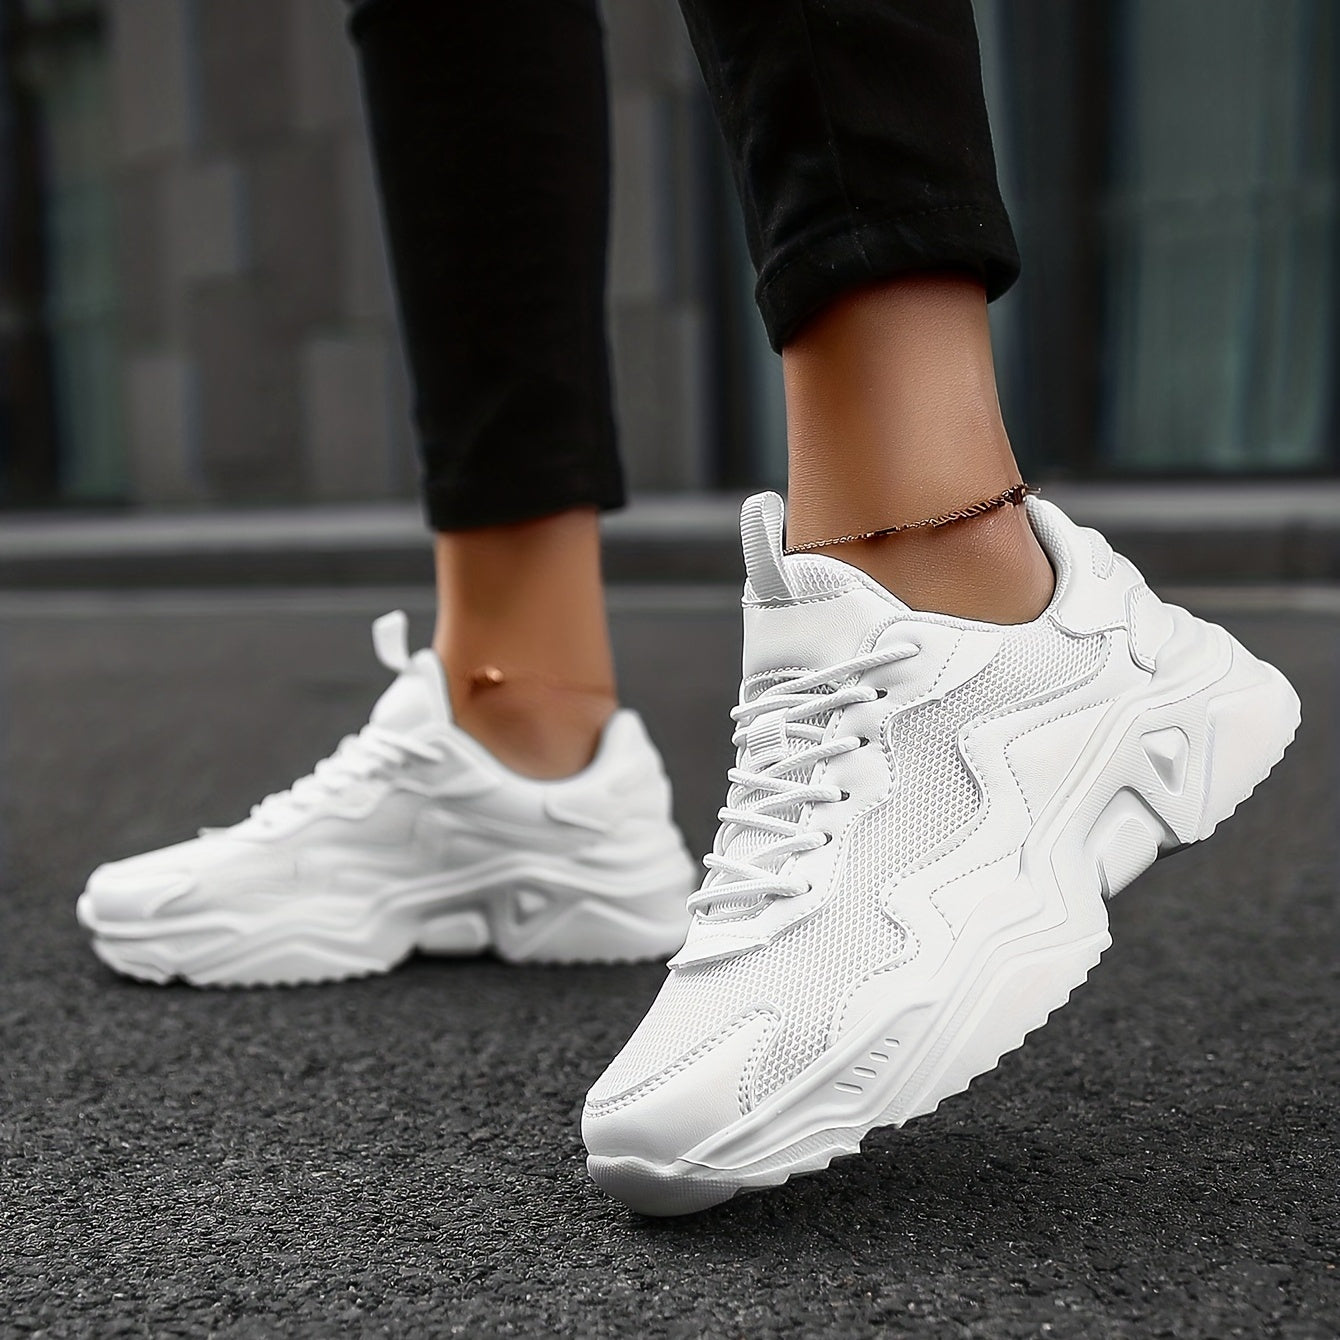 「lovevop」Women's White Breathable Mesh Sneakers, Comfortable Low Top Lace Up Shoes, Women's Casual Walking Shoes